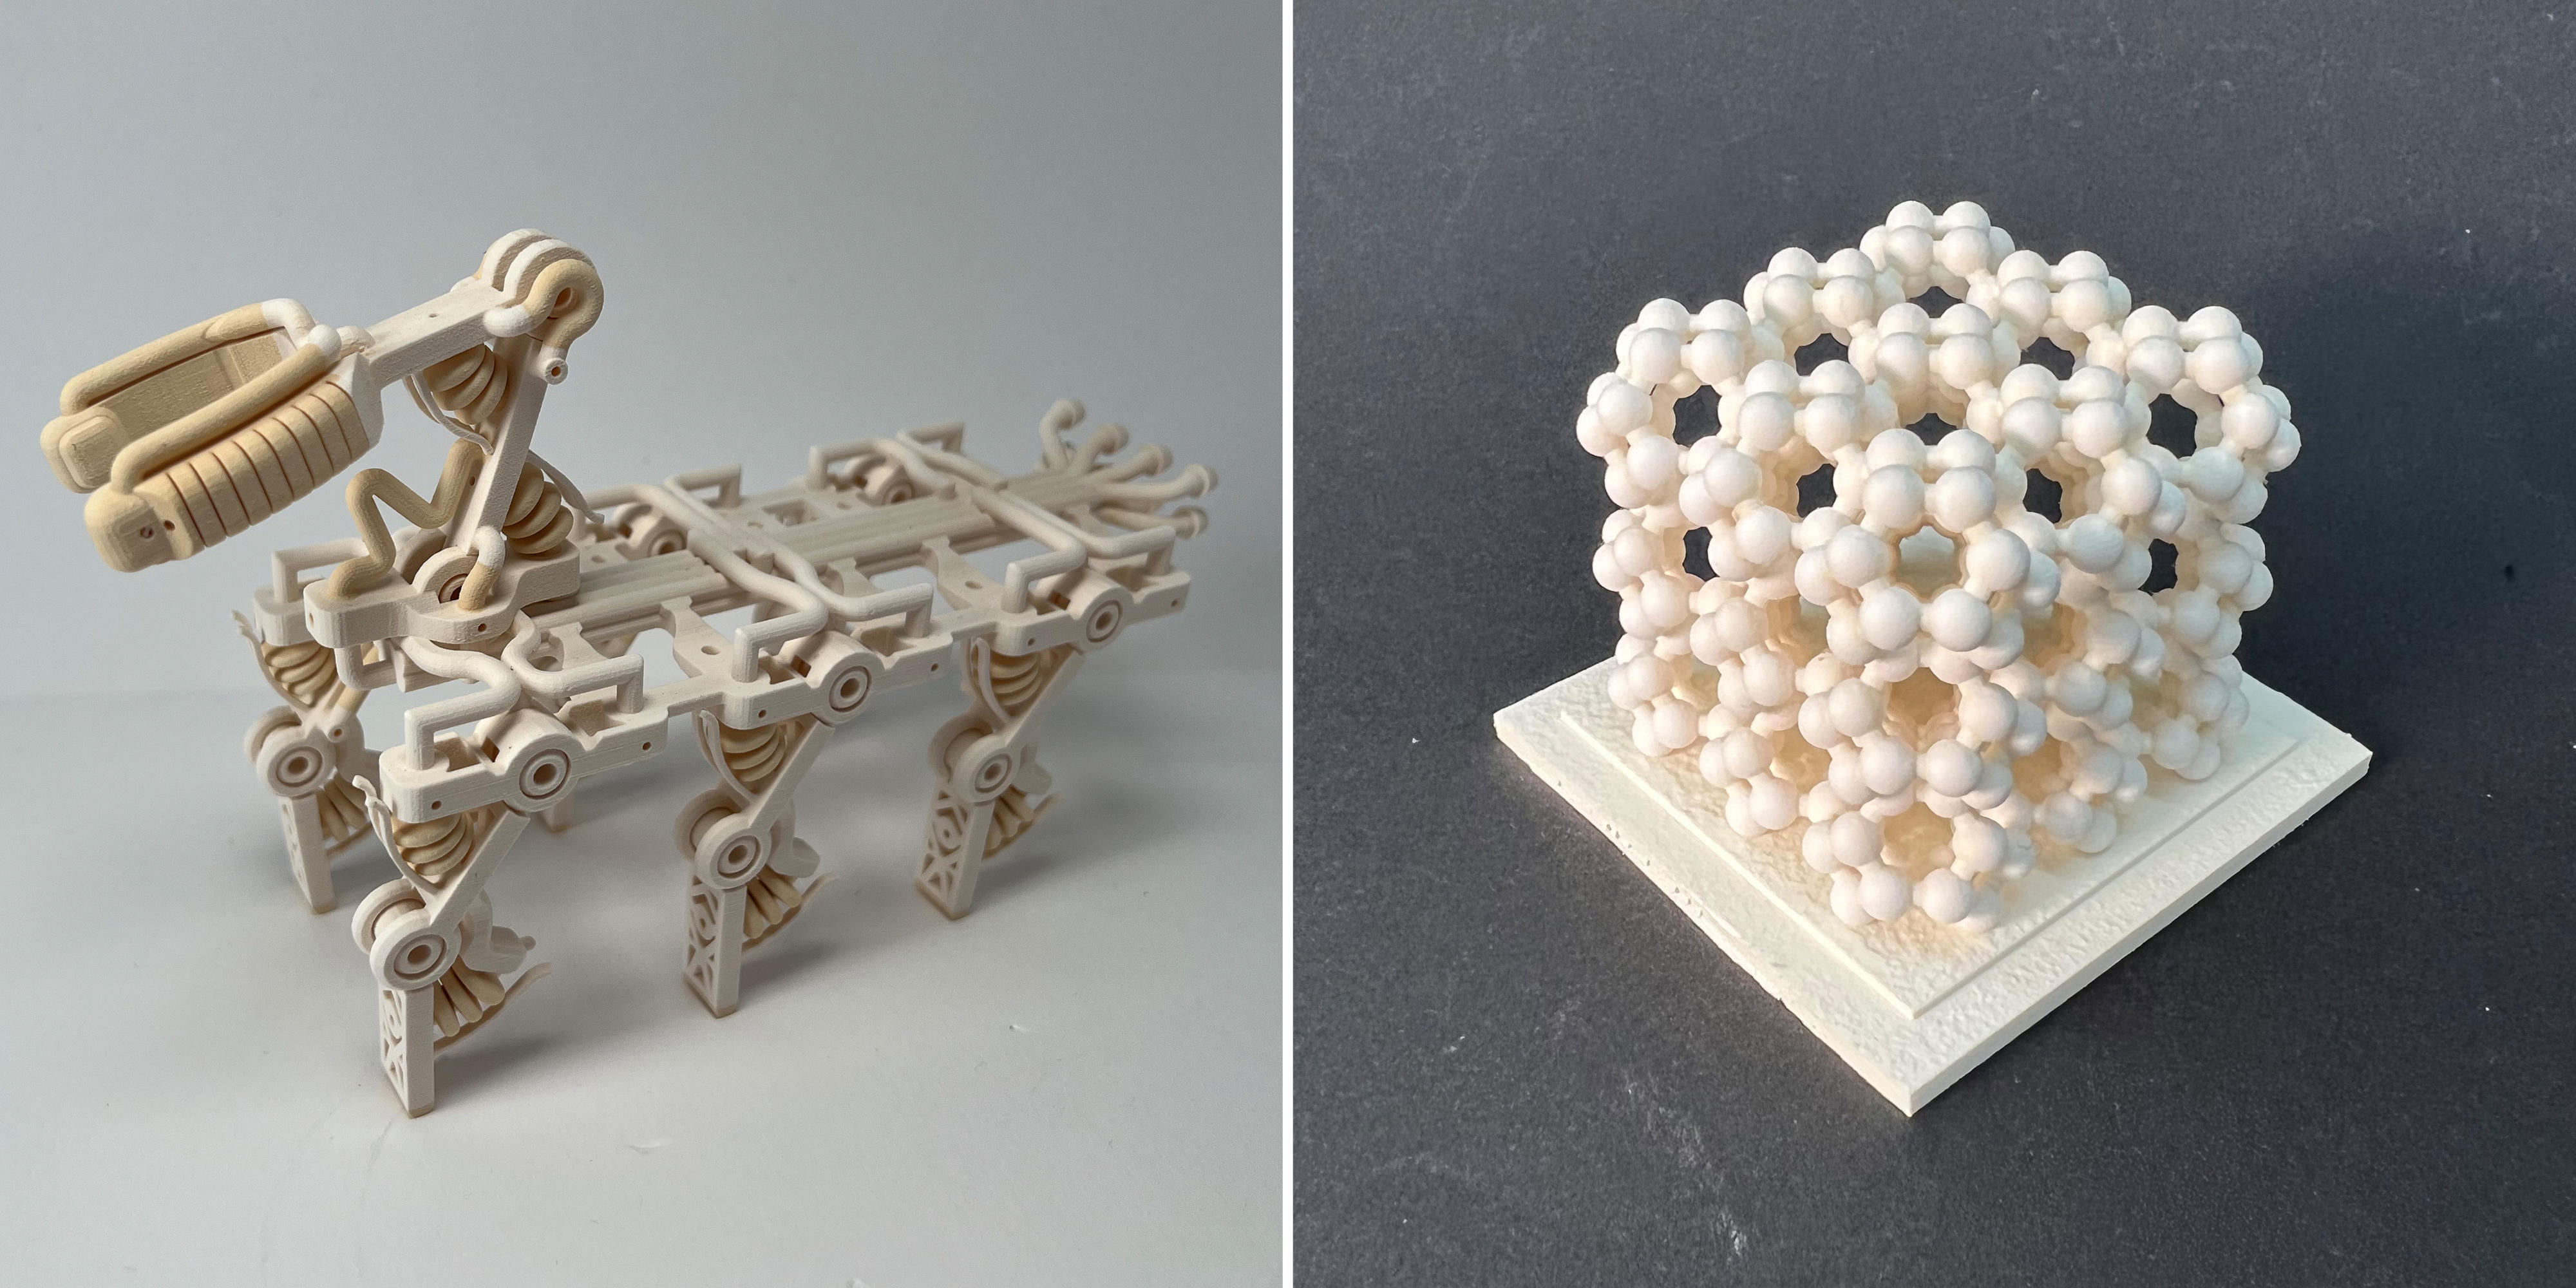 left panel shows a robot with a pincer-like grabber and six legs, right panel shows a cube-shaped molecular structure of a new material